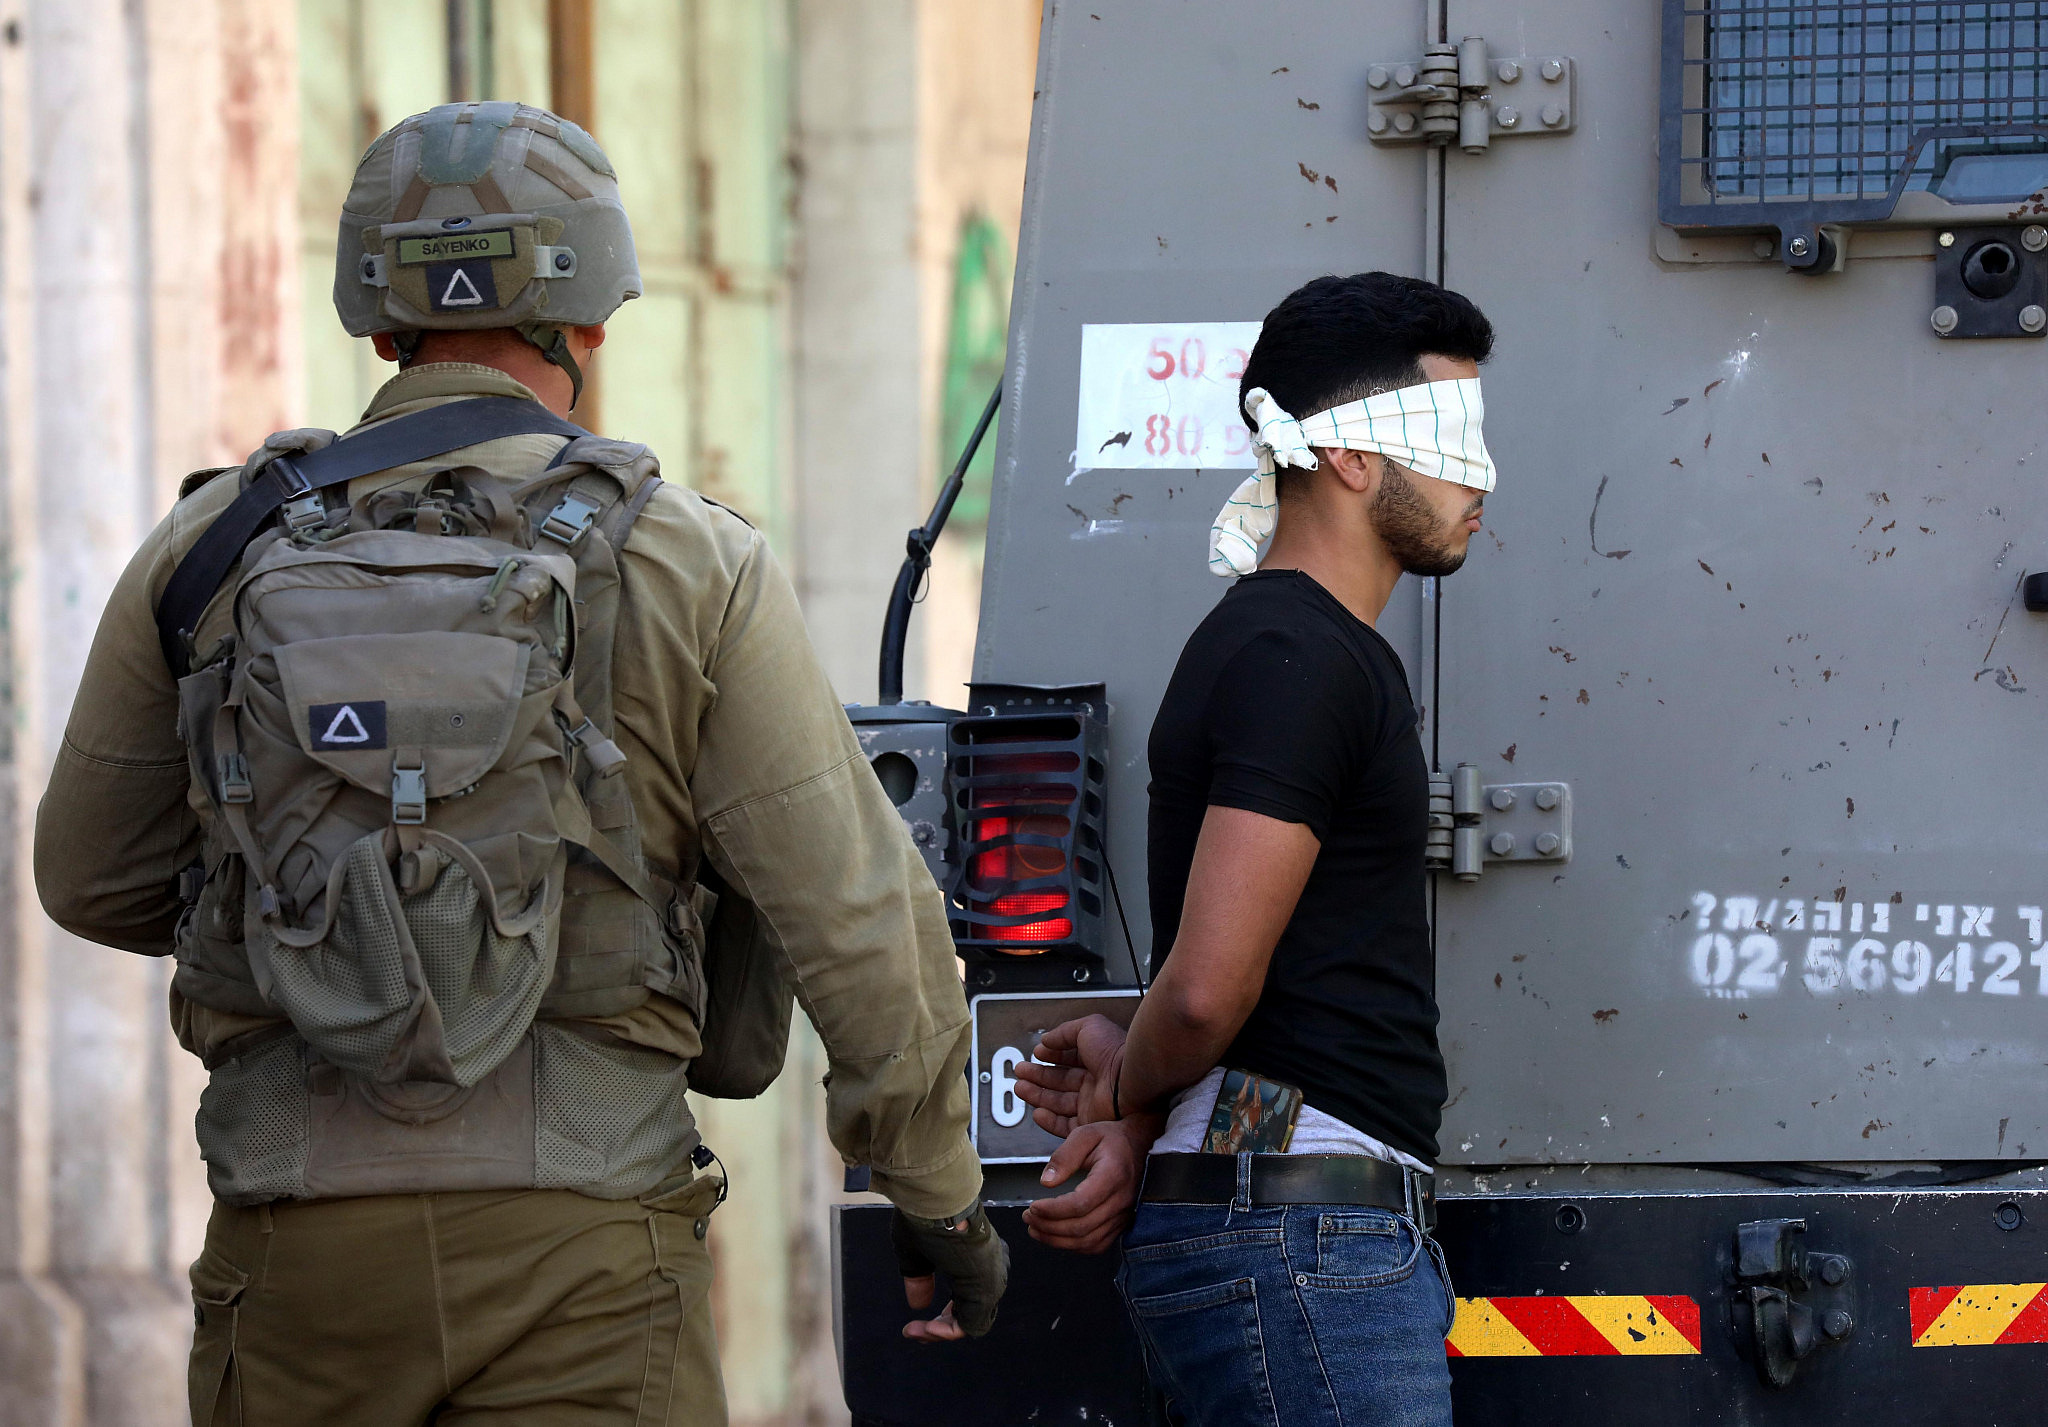 Israeli soldiers arrest a Palestinian youth during clashes between Palestinians and Israeli soldiers in the West Bank city of Hebron, September 9, 2022. (Wisam Hashlamoun/Flash90)